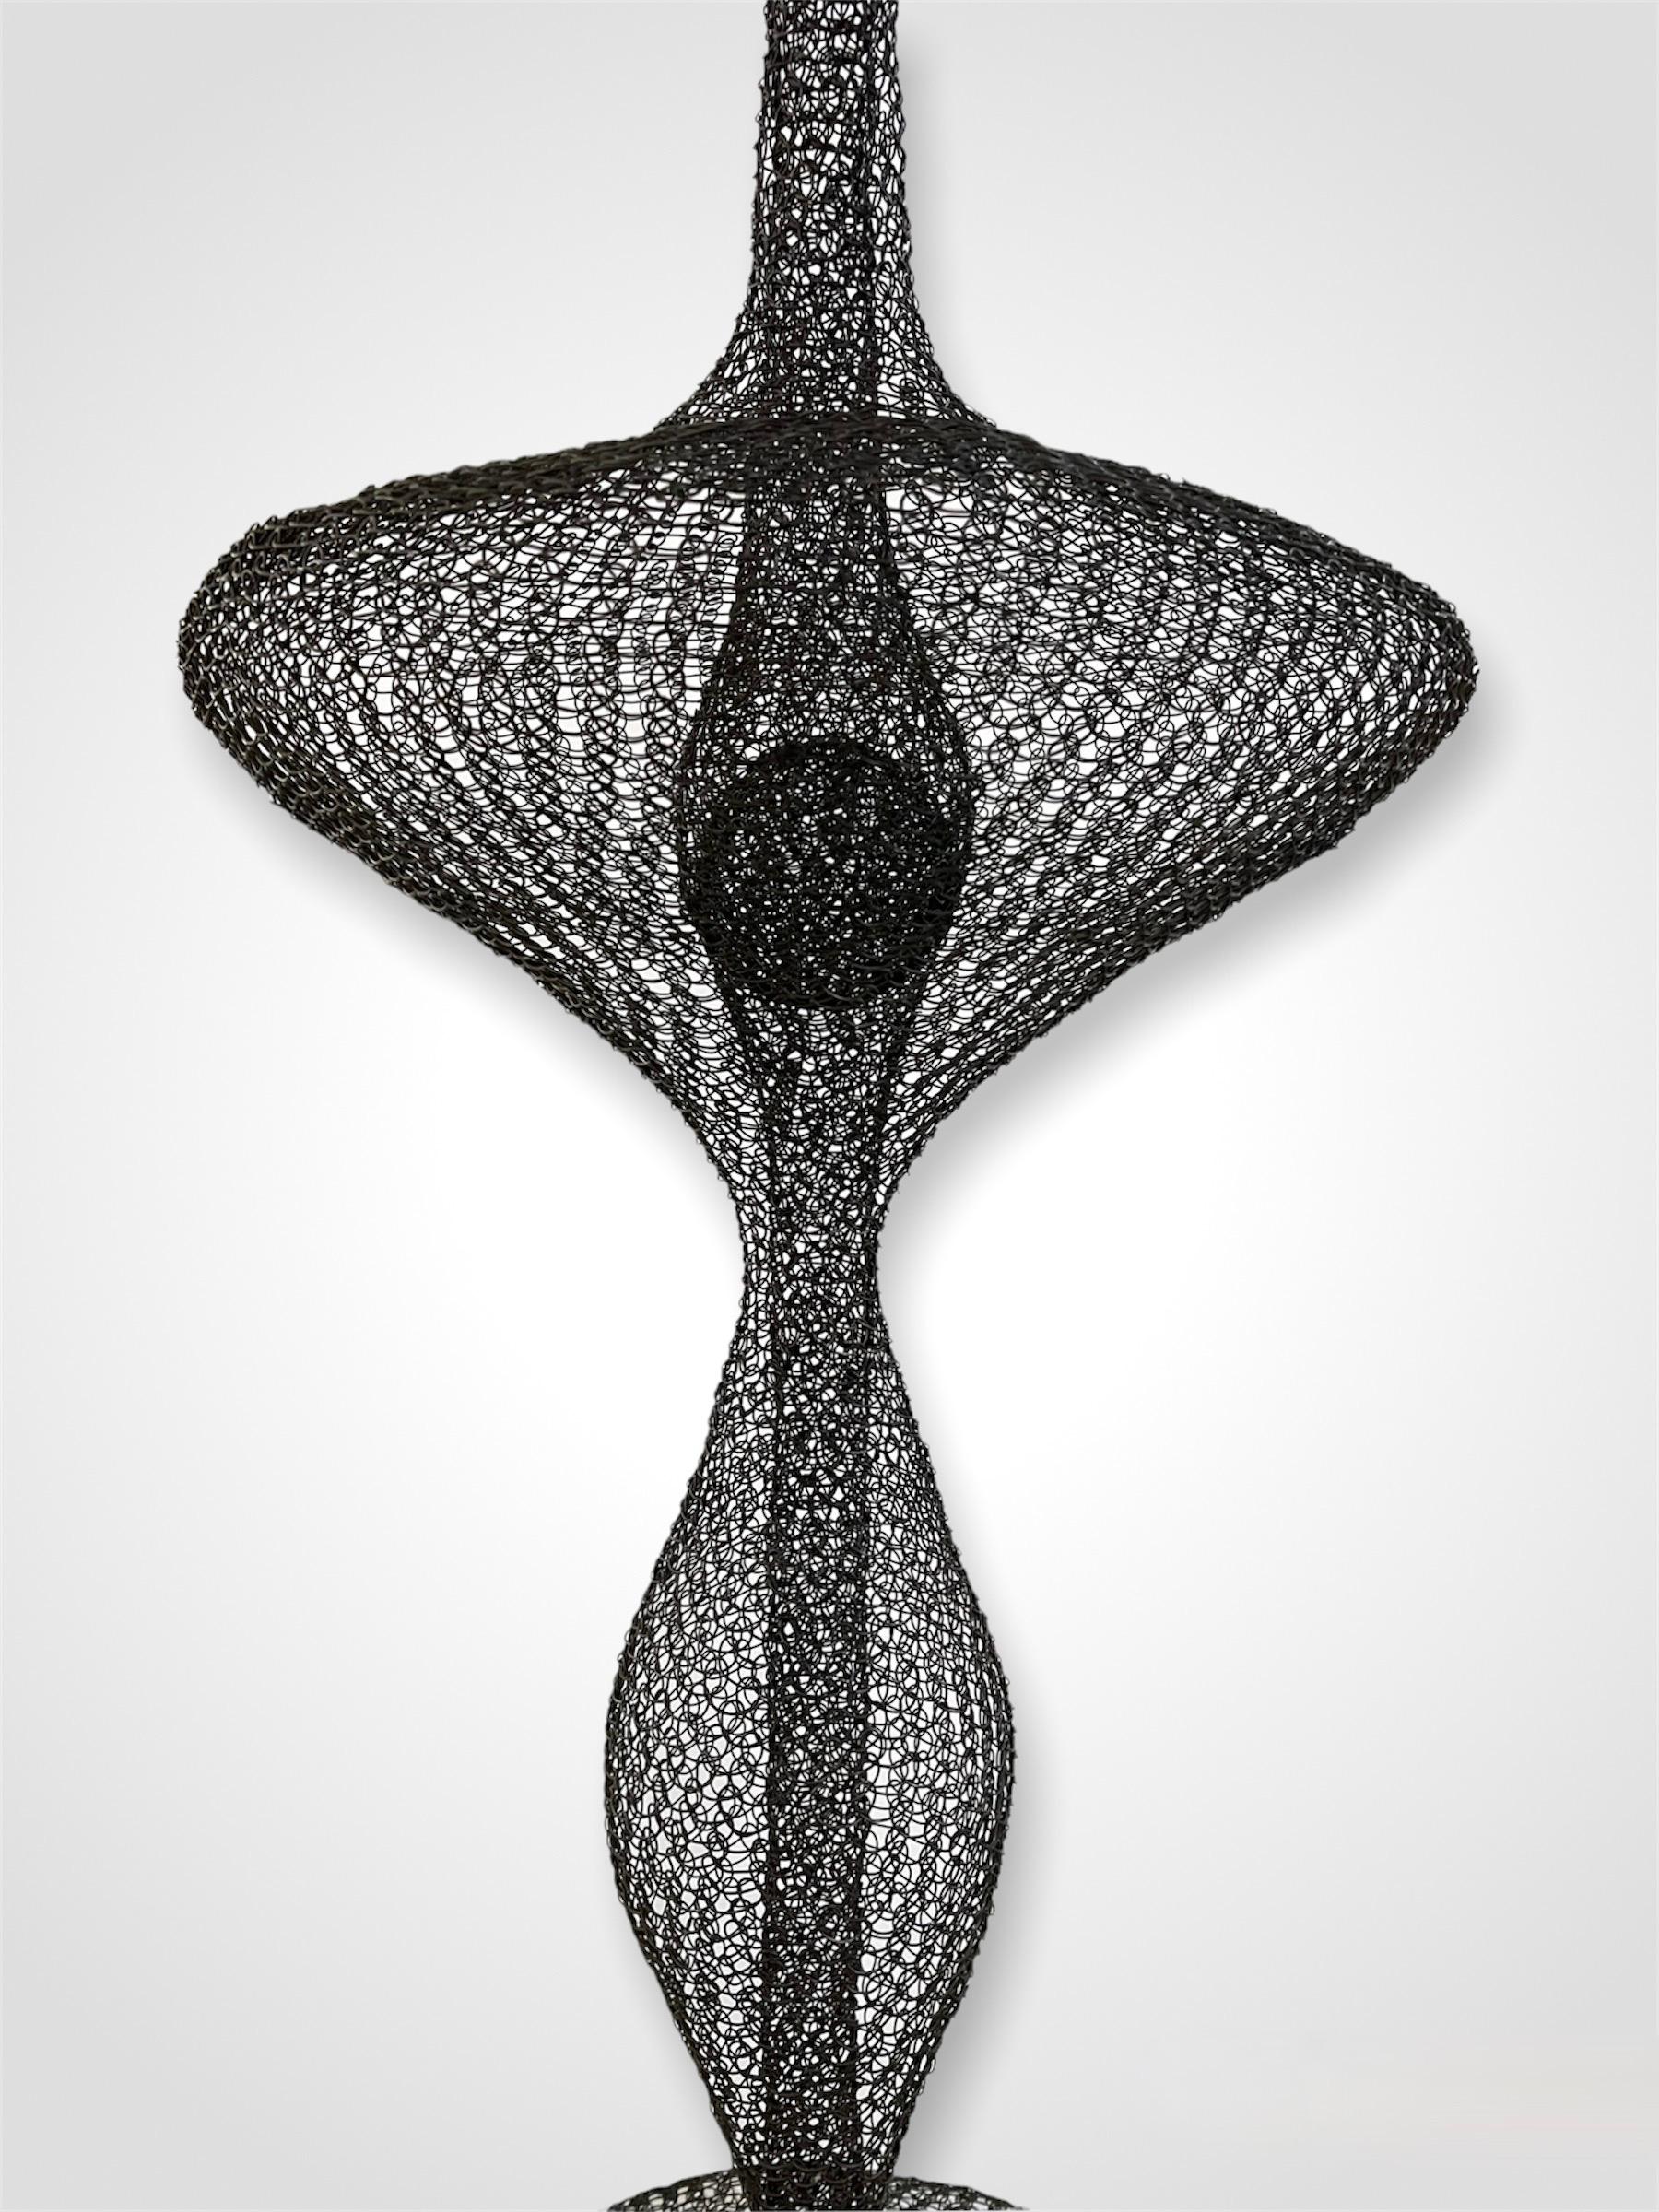 Industrial Organic Woven Mesh Wire Sculpture by Ulrikk Dufosse For Sale